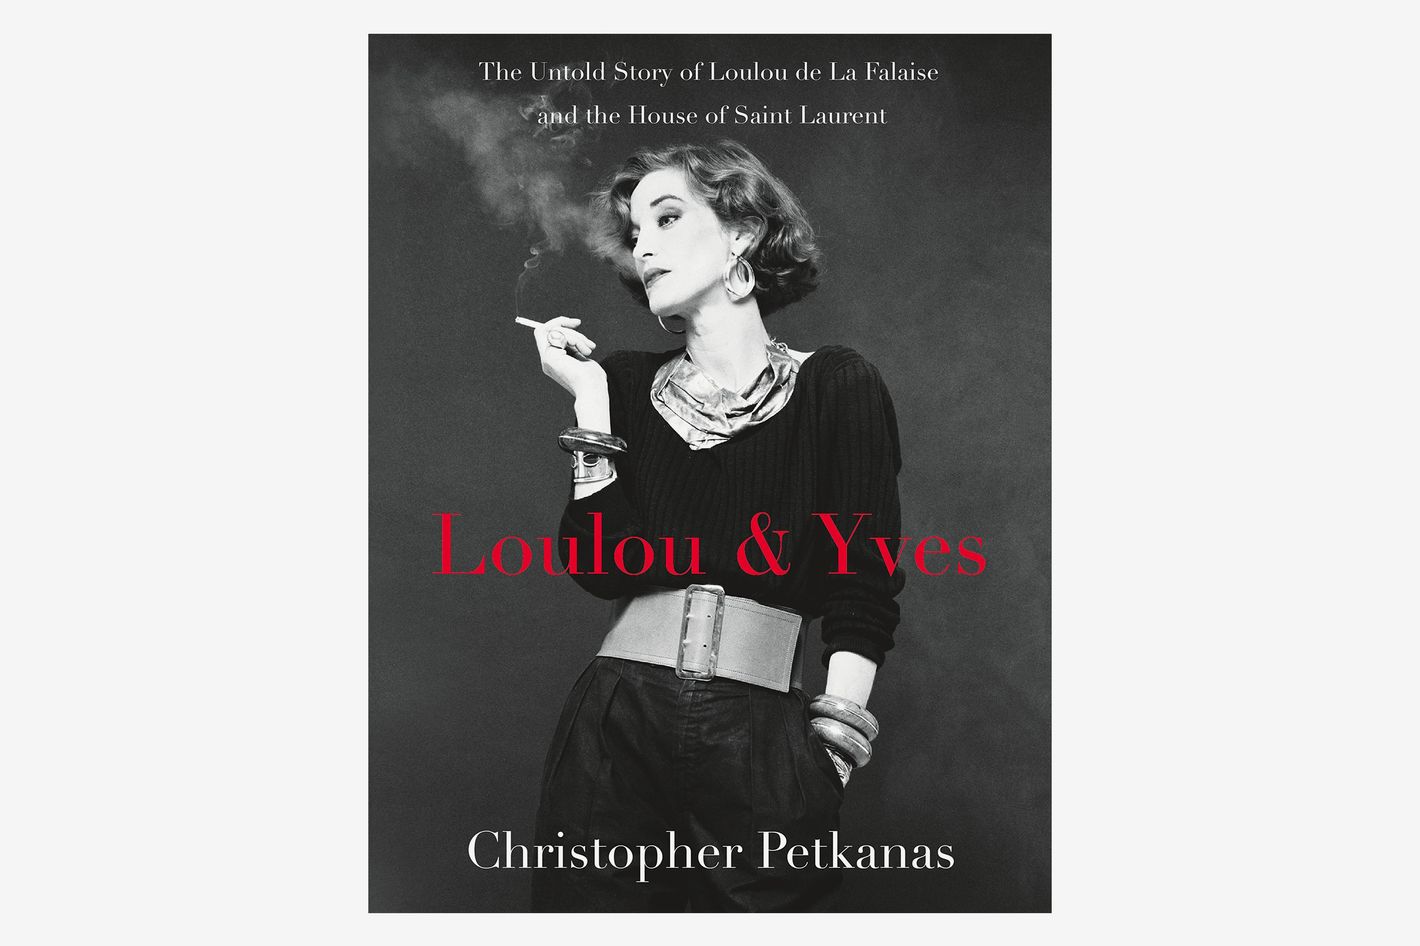 Loulou & Yves: The Untold Story of Loulou de La Falaise and the House of Saint Laurent by Christopher Petkanas